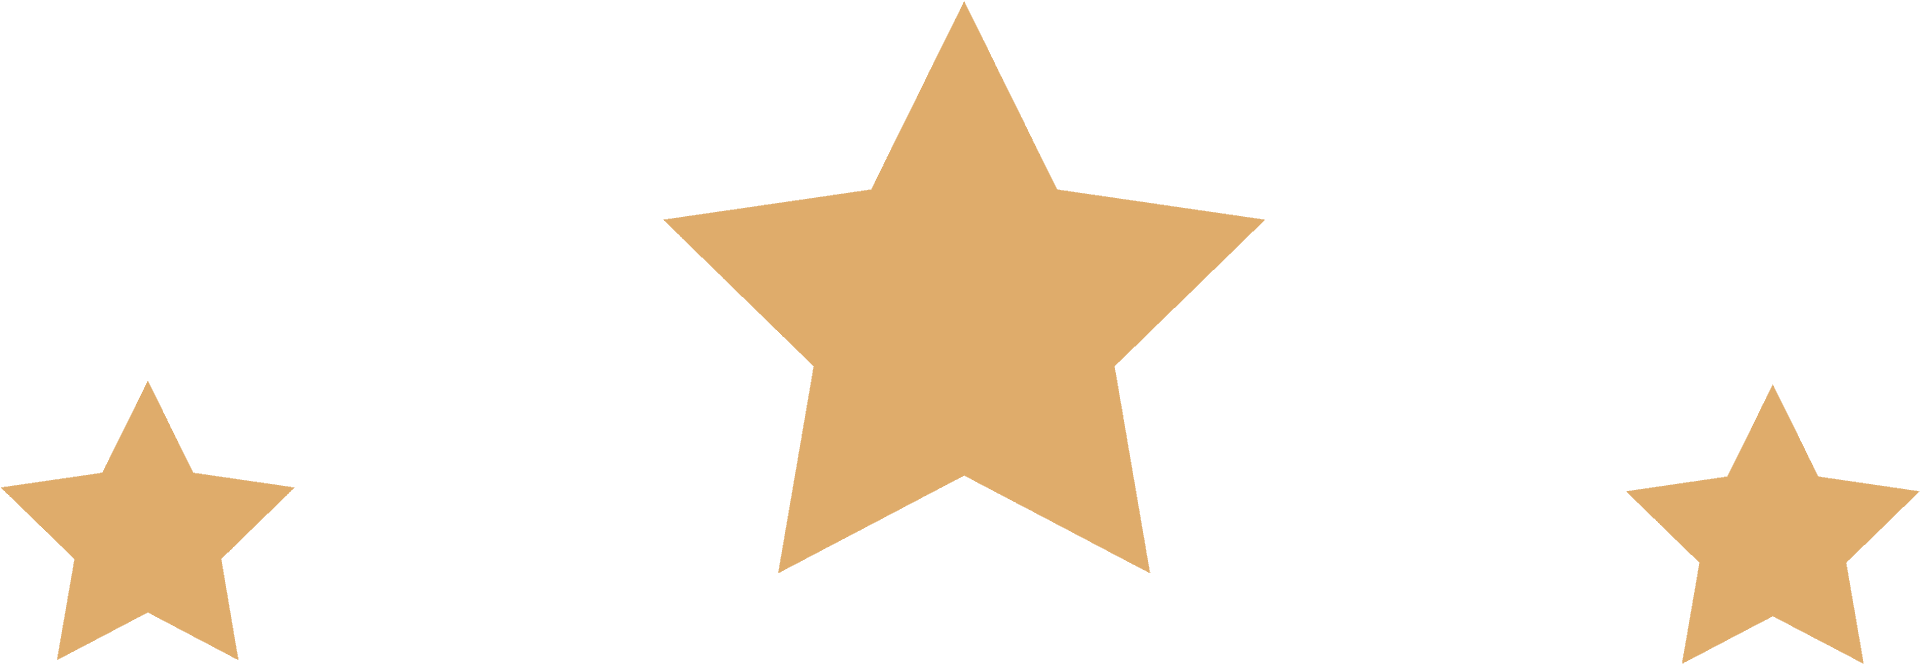 Scentsy Star Logo PNG